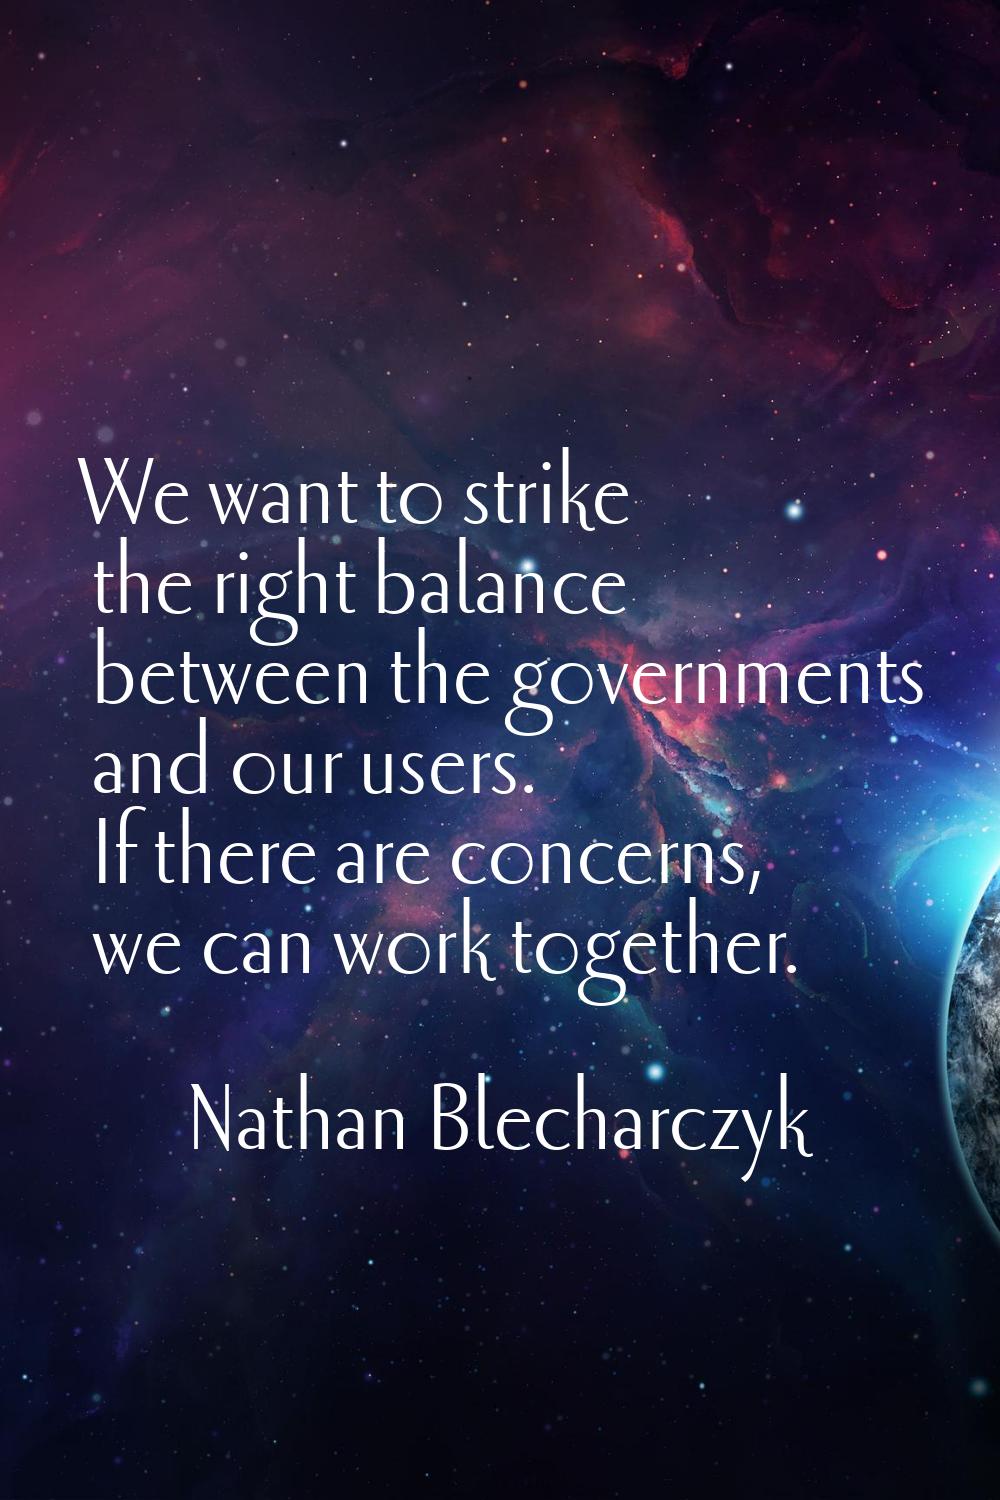 We want to strike the right balance between the governments and our users. If there are concerns, w